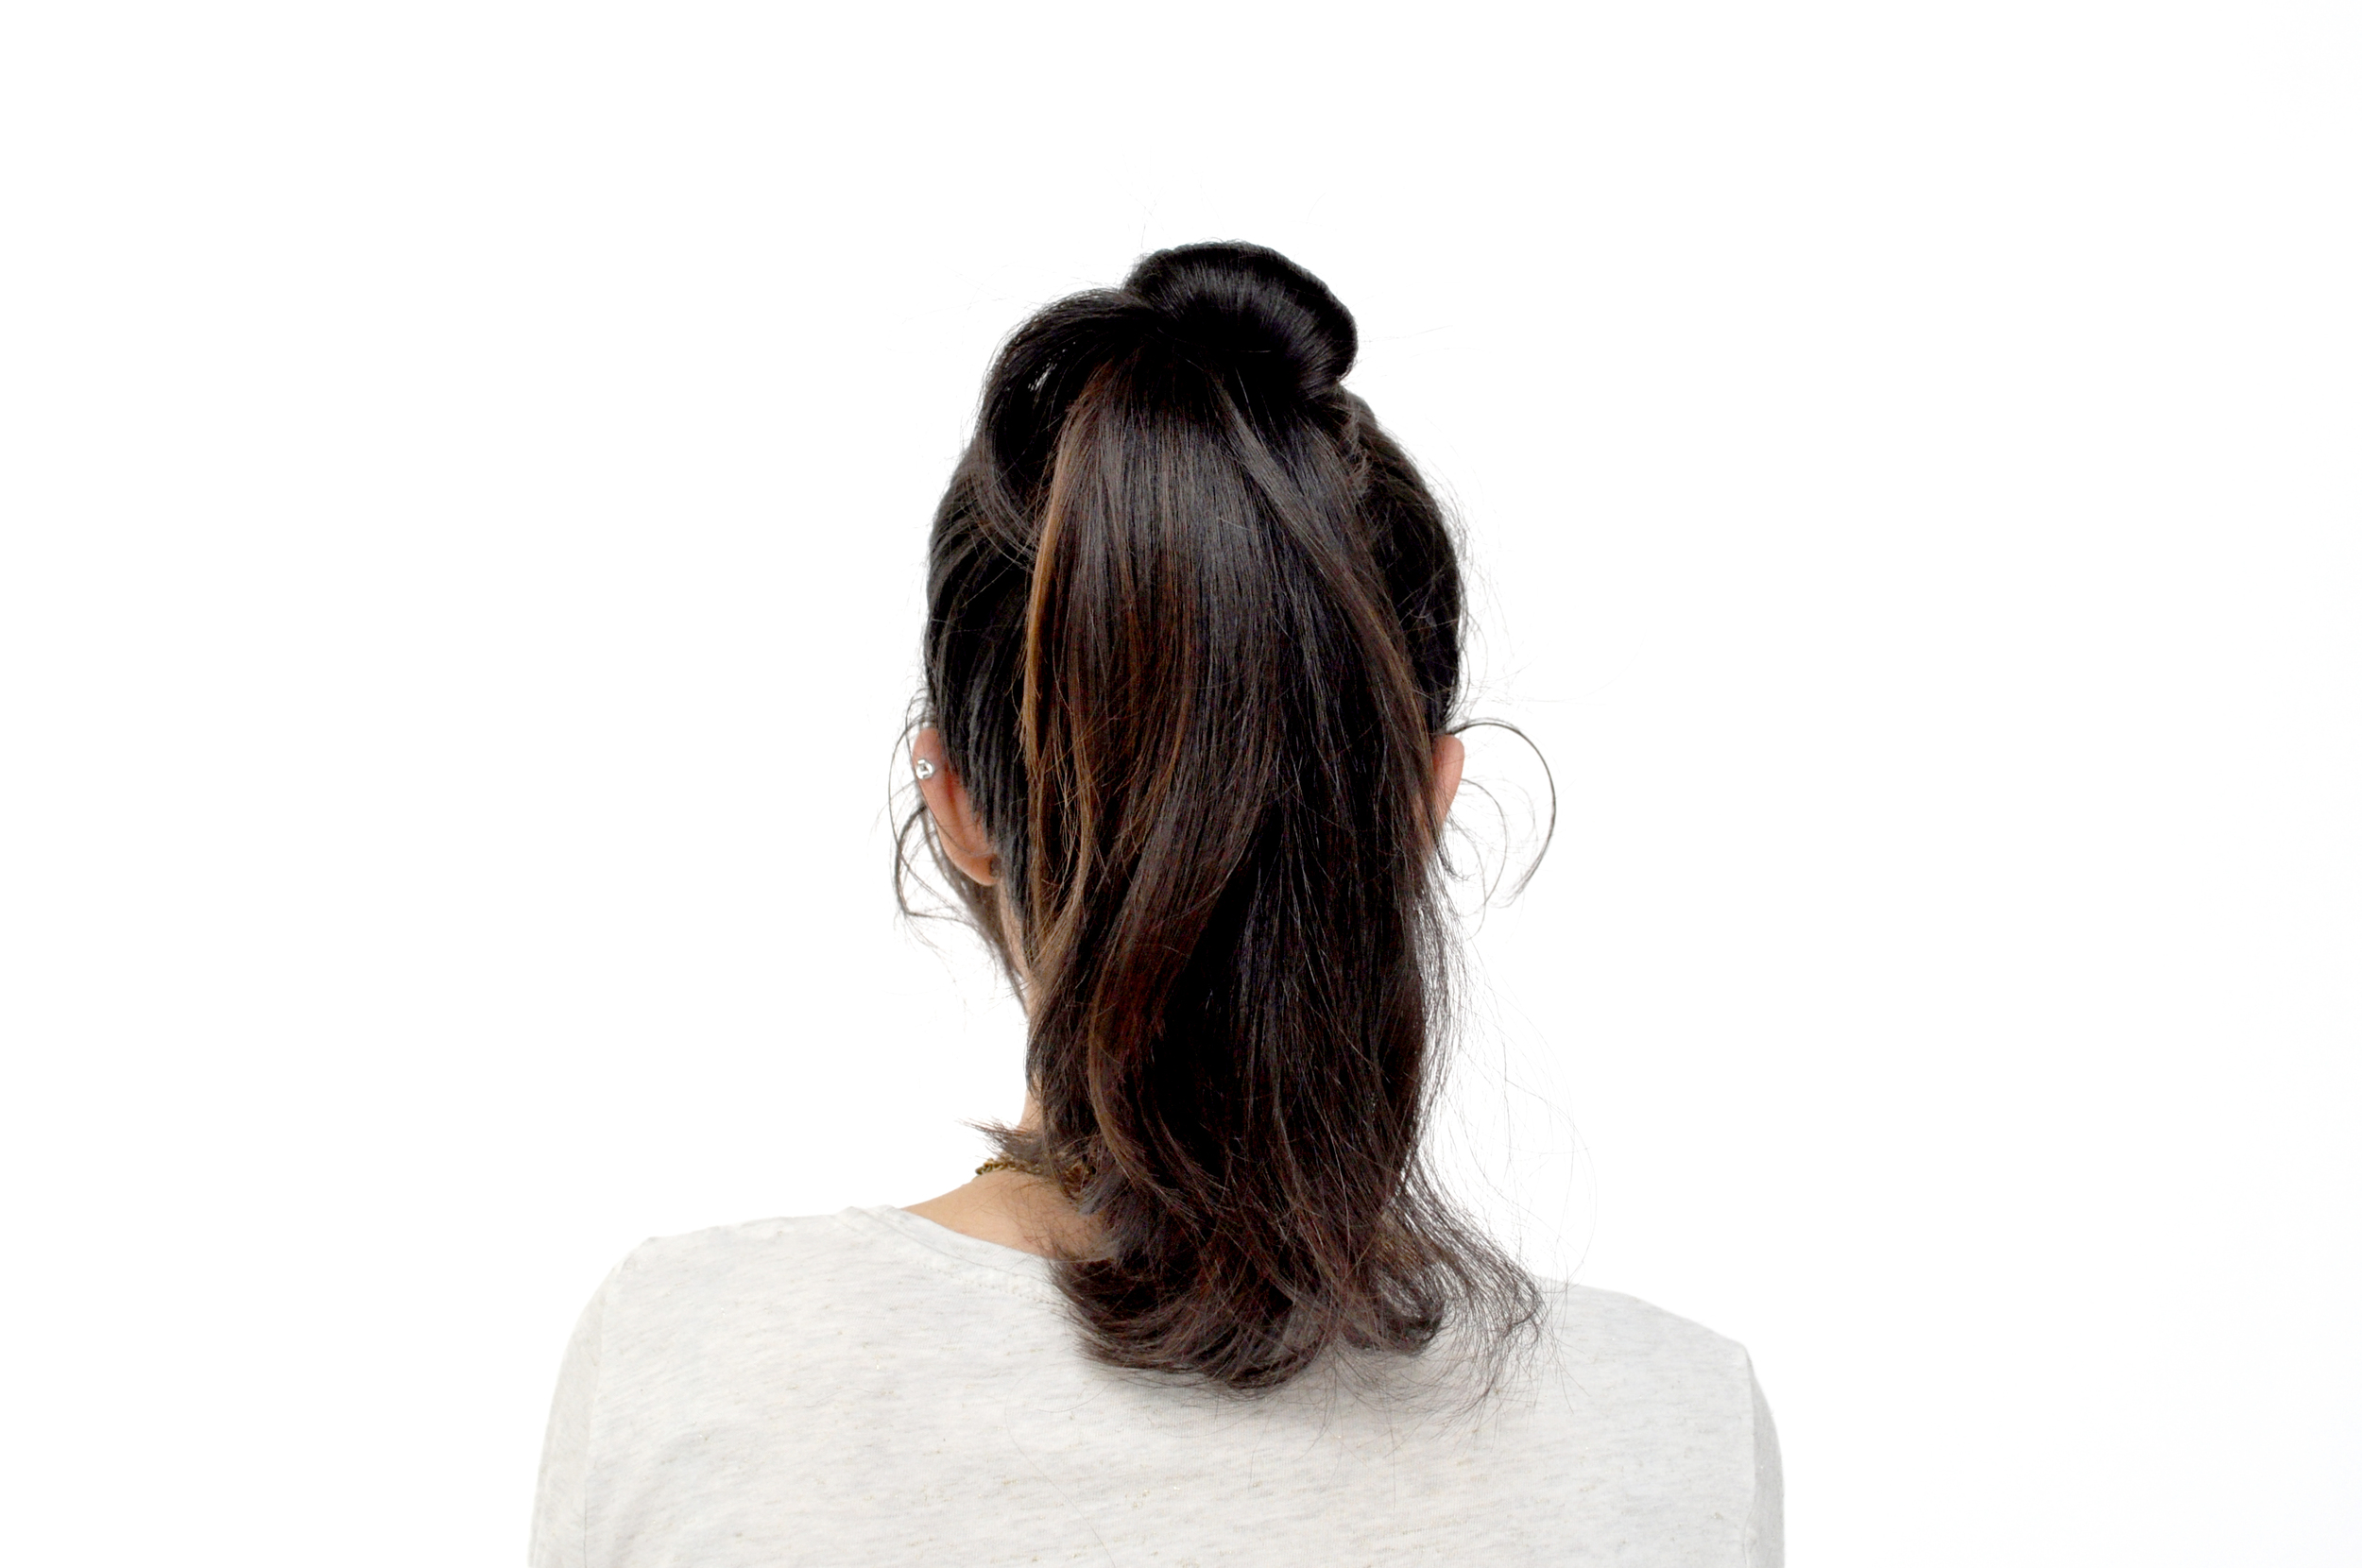  Take one section of your pony tail and wrap it around the base. For a messier effect, loosely wrap the section around the base and secure the end with a bobby pin. 